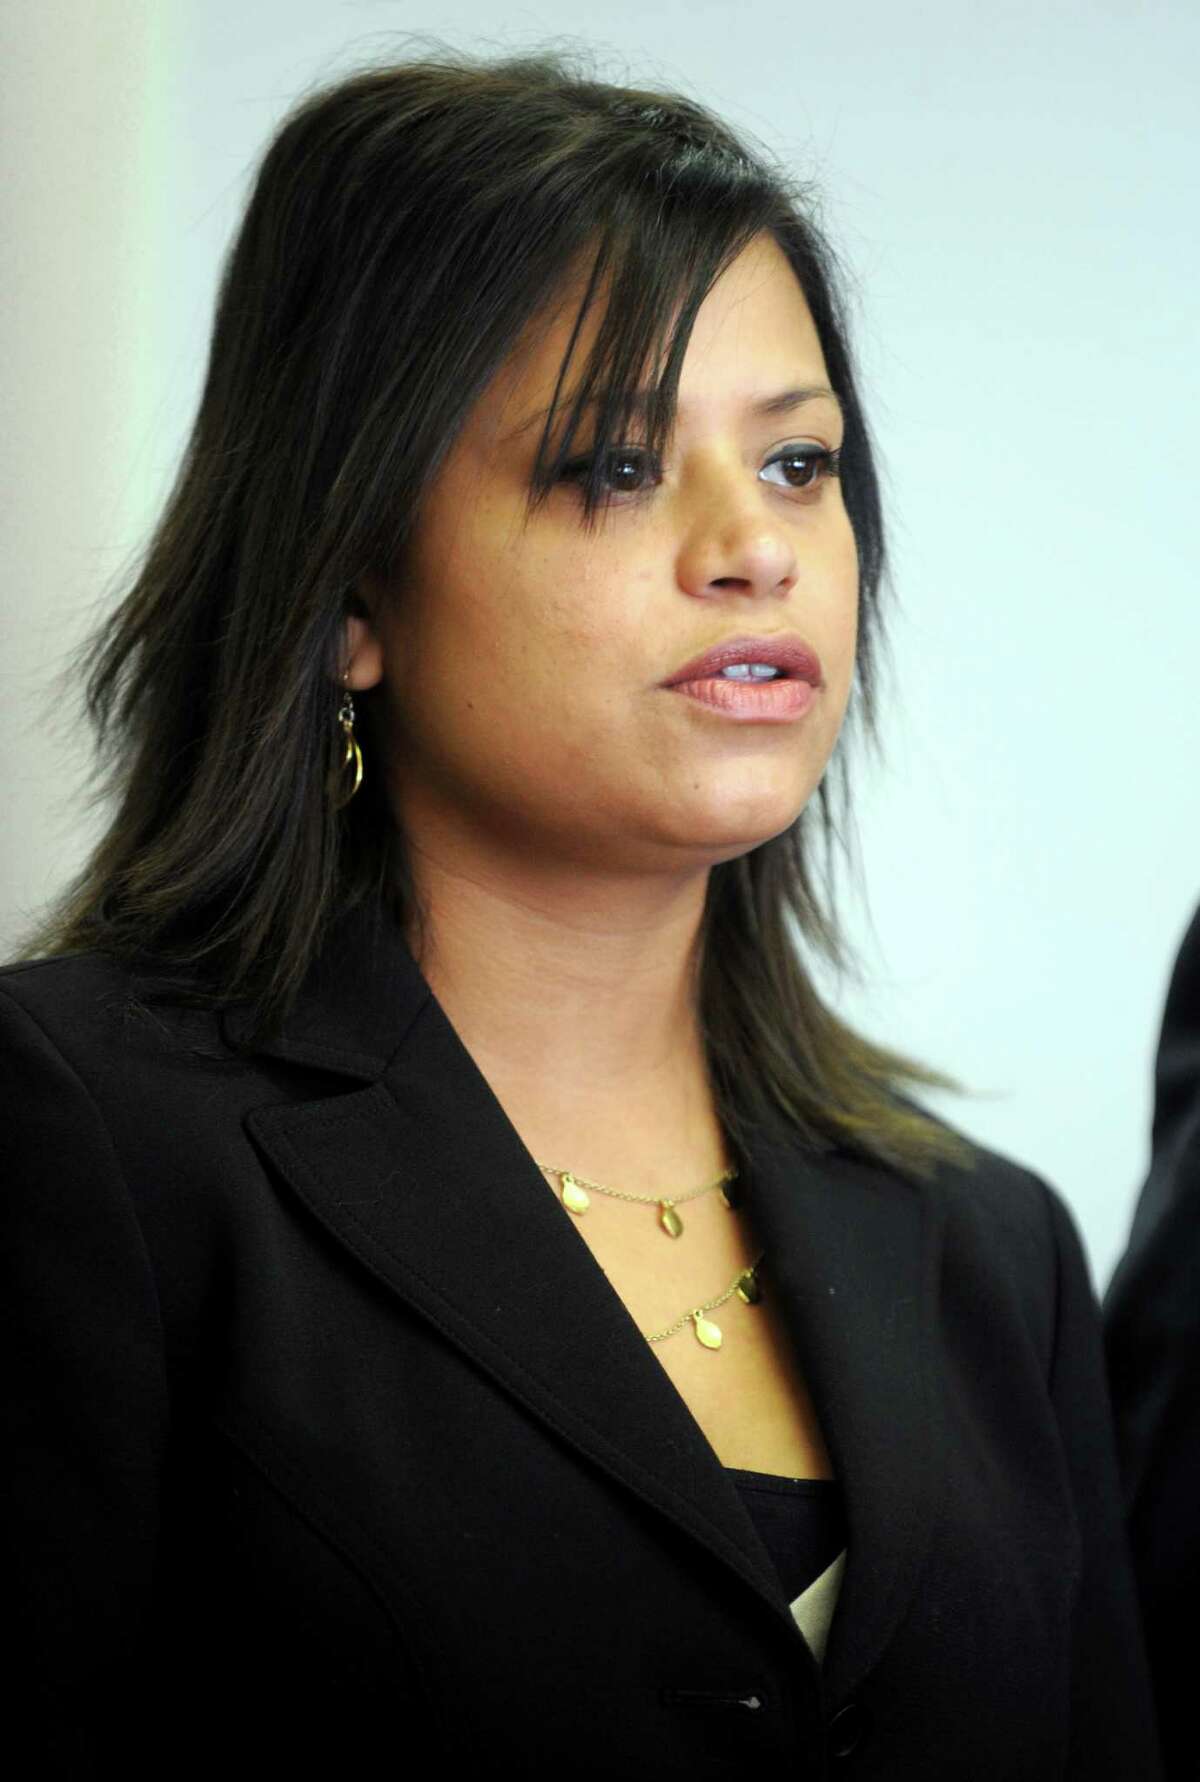 In 2013, which of the following DID NOT happen to Bridgeport state Rep. Christina Ayala? A. A state election panel accused her of fraud B. Her ex-boyfriend was arrested for torching her sister’s car C. The ex’s new girlfriend filed a police complaint accusing Ayala of beating her up. D. She resigned